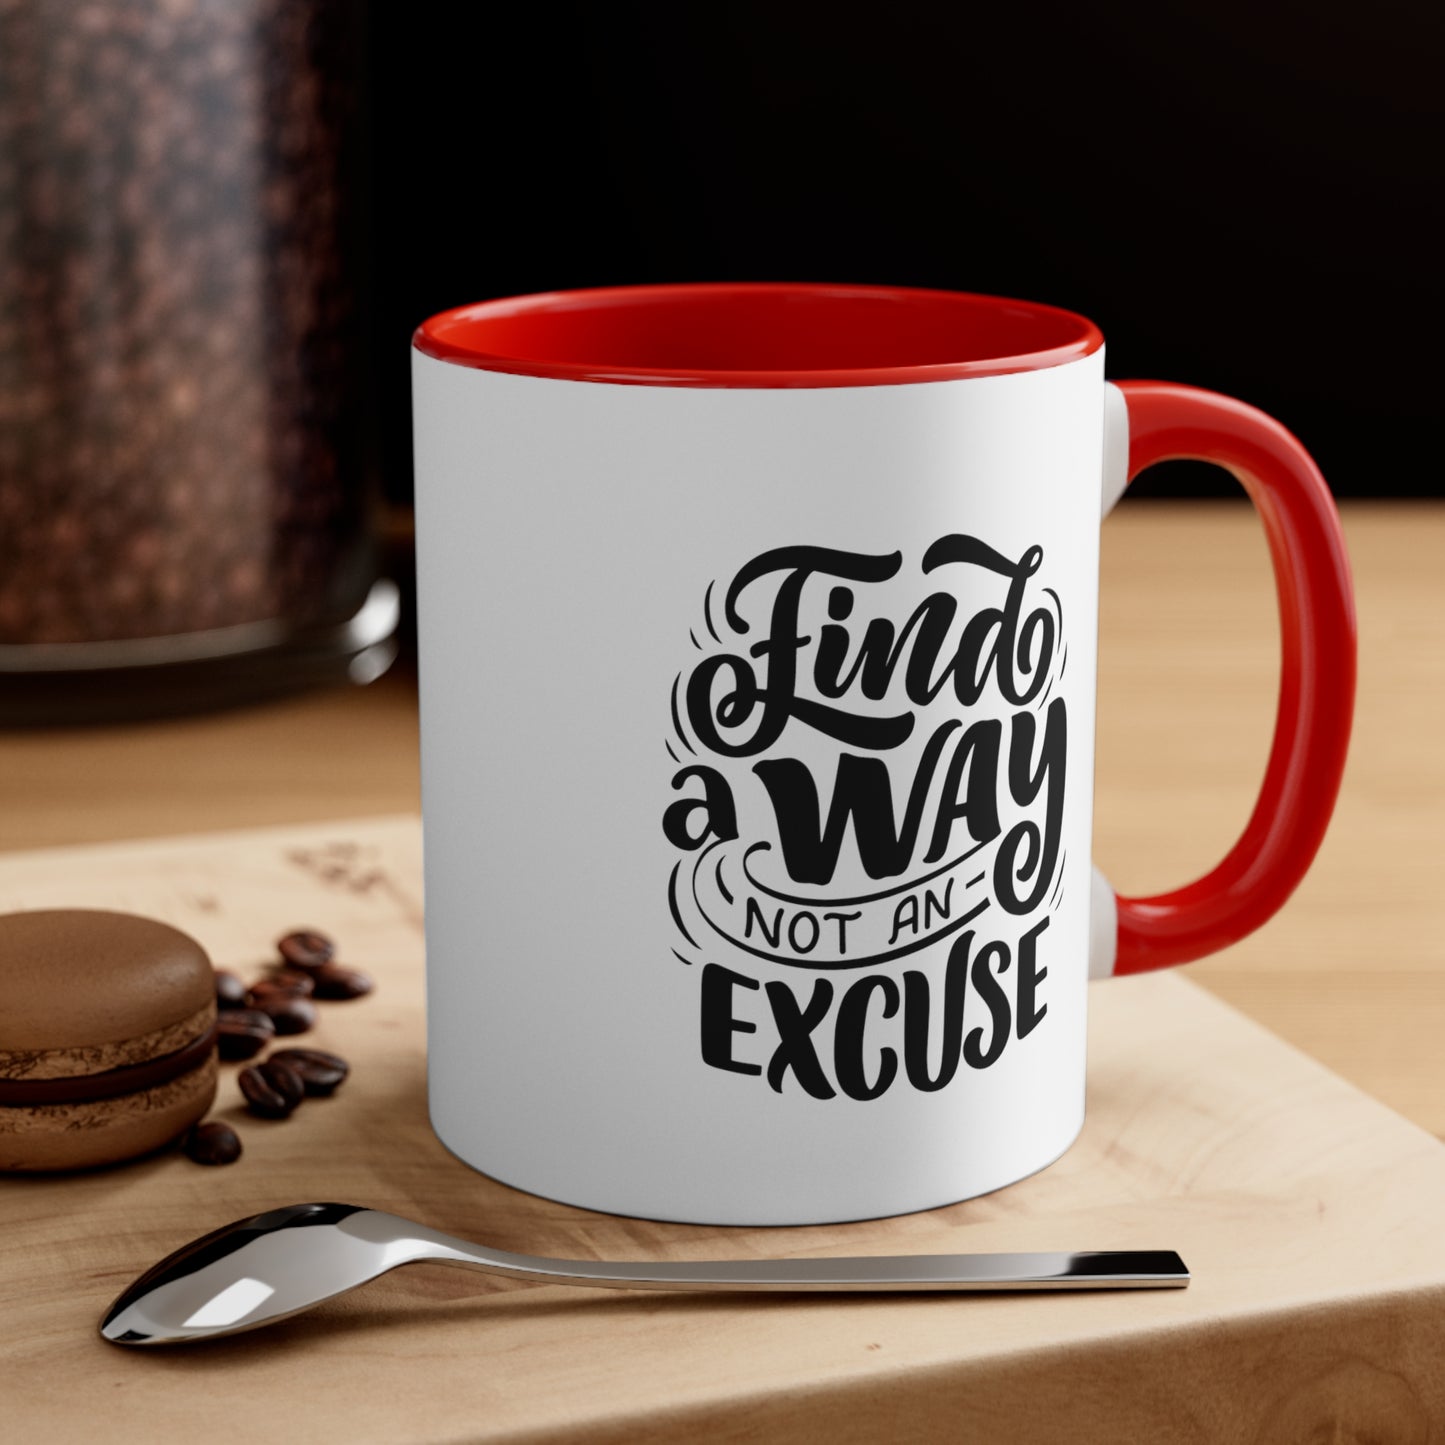 Find a Way, Not an Excuse Coffee Mug